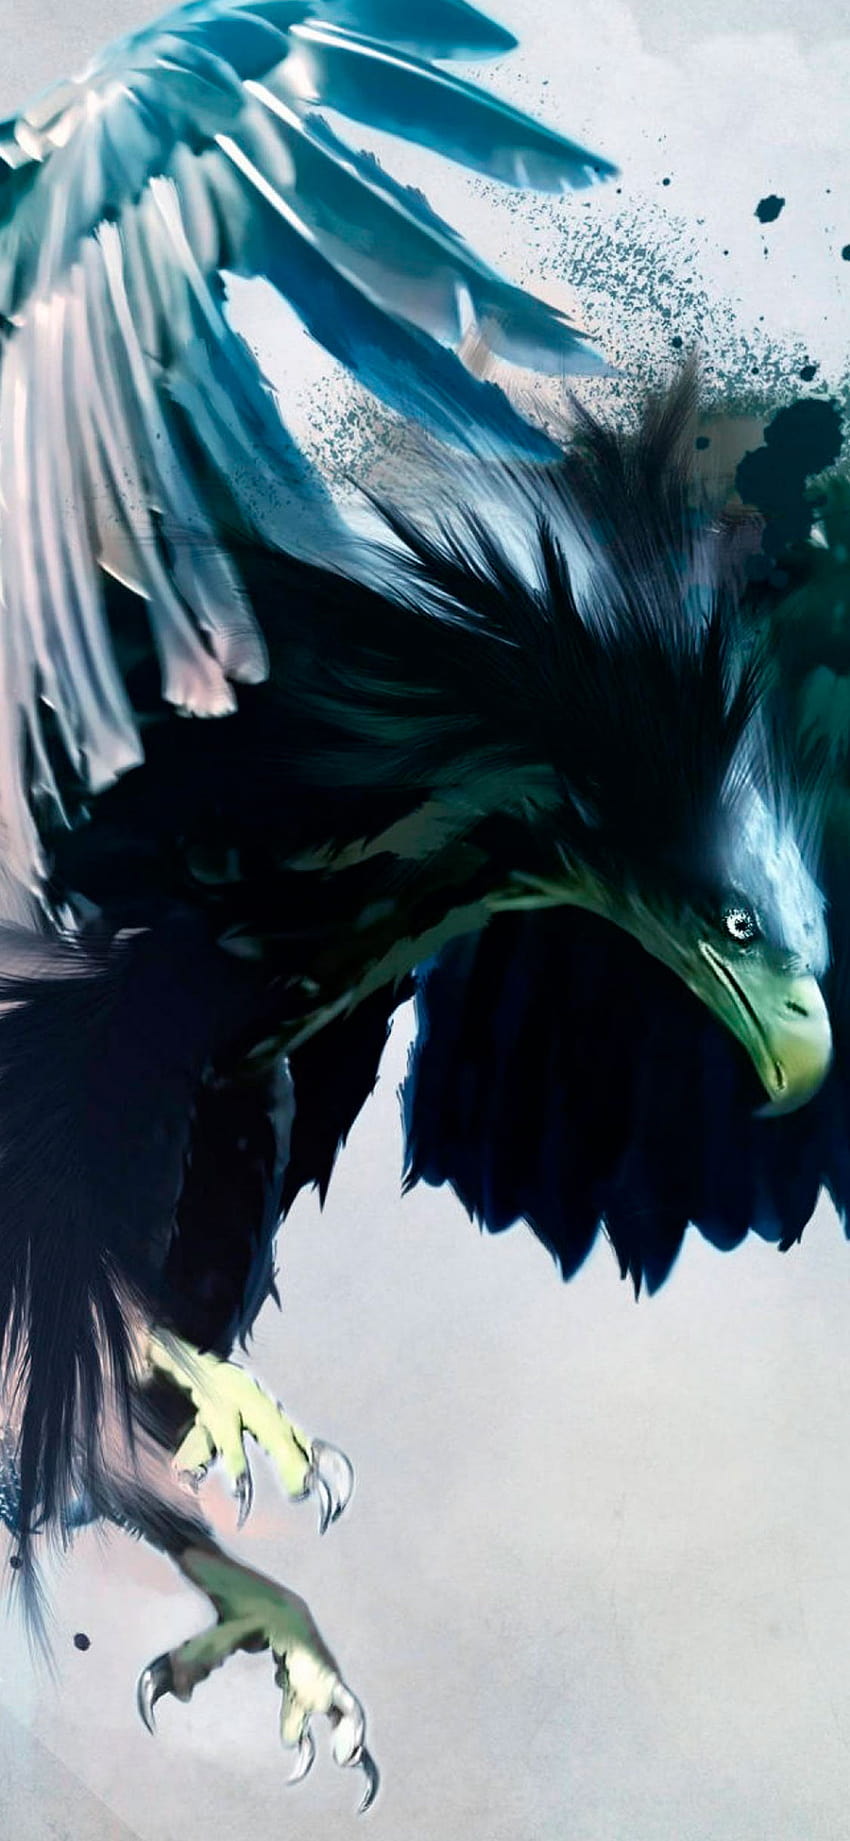 Eagle for iPhone 11, Pro Max, X, 8, 7, 6, angry eagle HD phone wallpaper